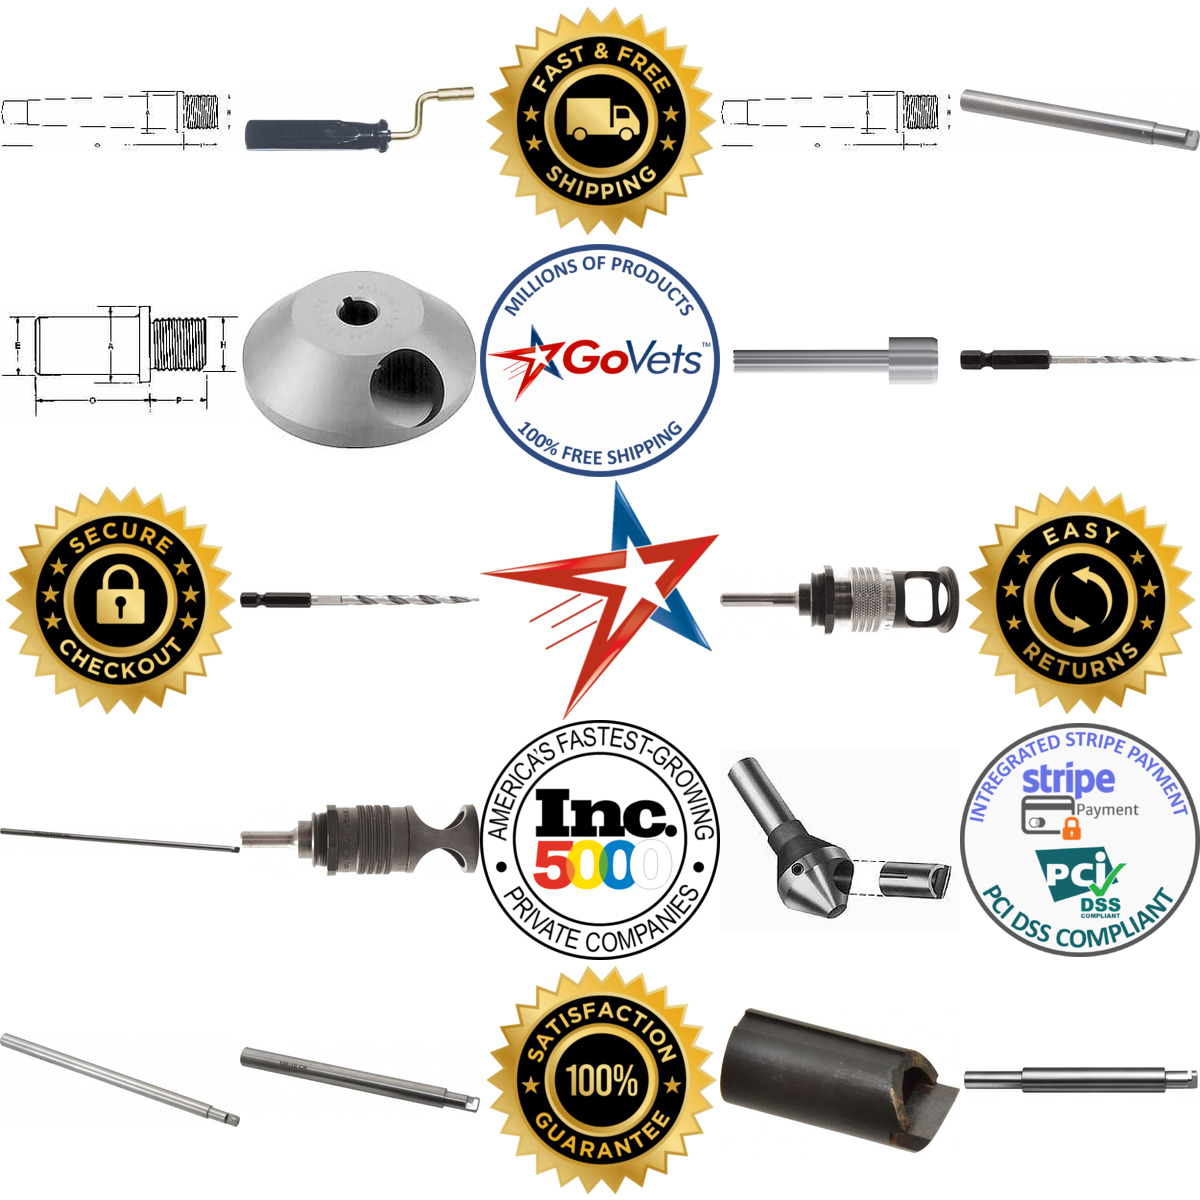 A selection of Countersink Accessories products on GoVets